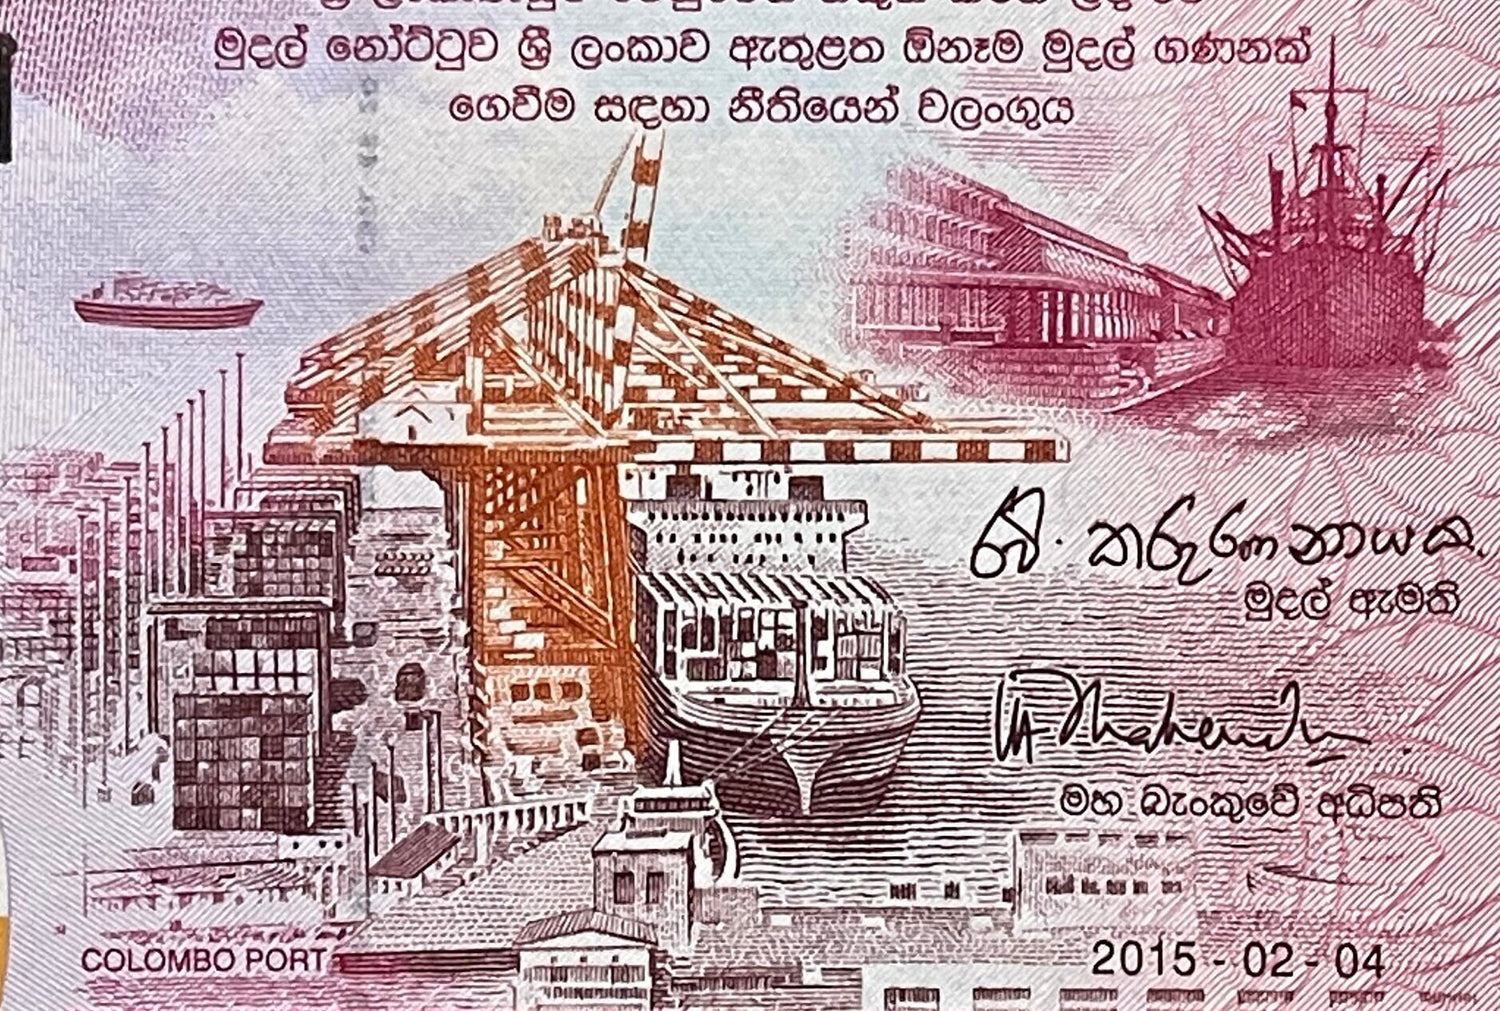 Kandyan Ves Dancer & Geta Beraya Drummer 20 Rupees Sri Lanka Authentic Banknote Money for Jewelry and Collage (Port of Colombo) Serendib Owl